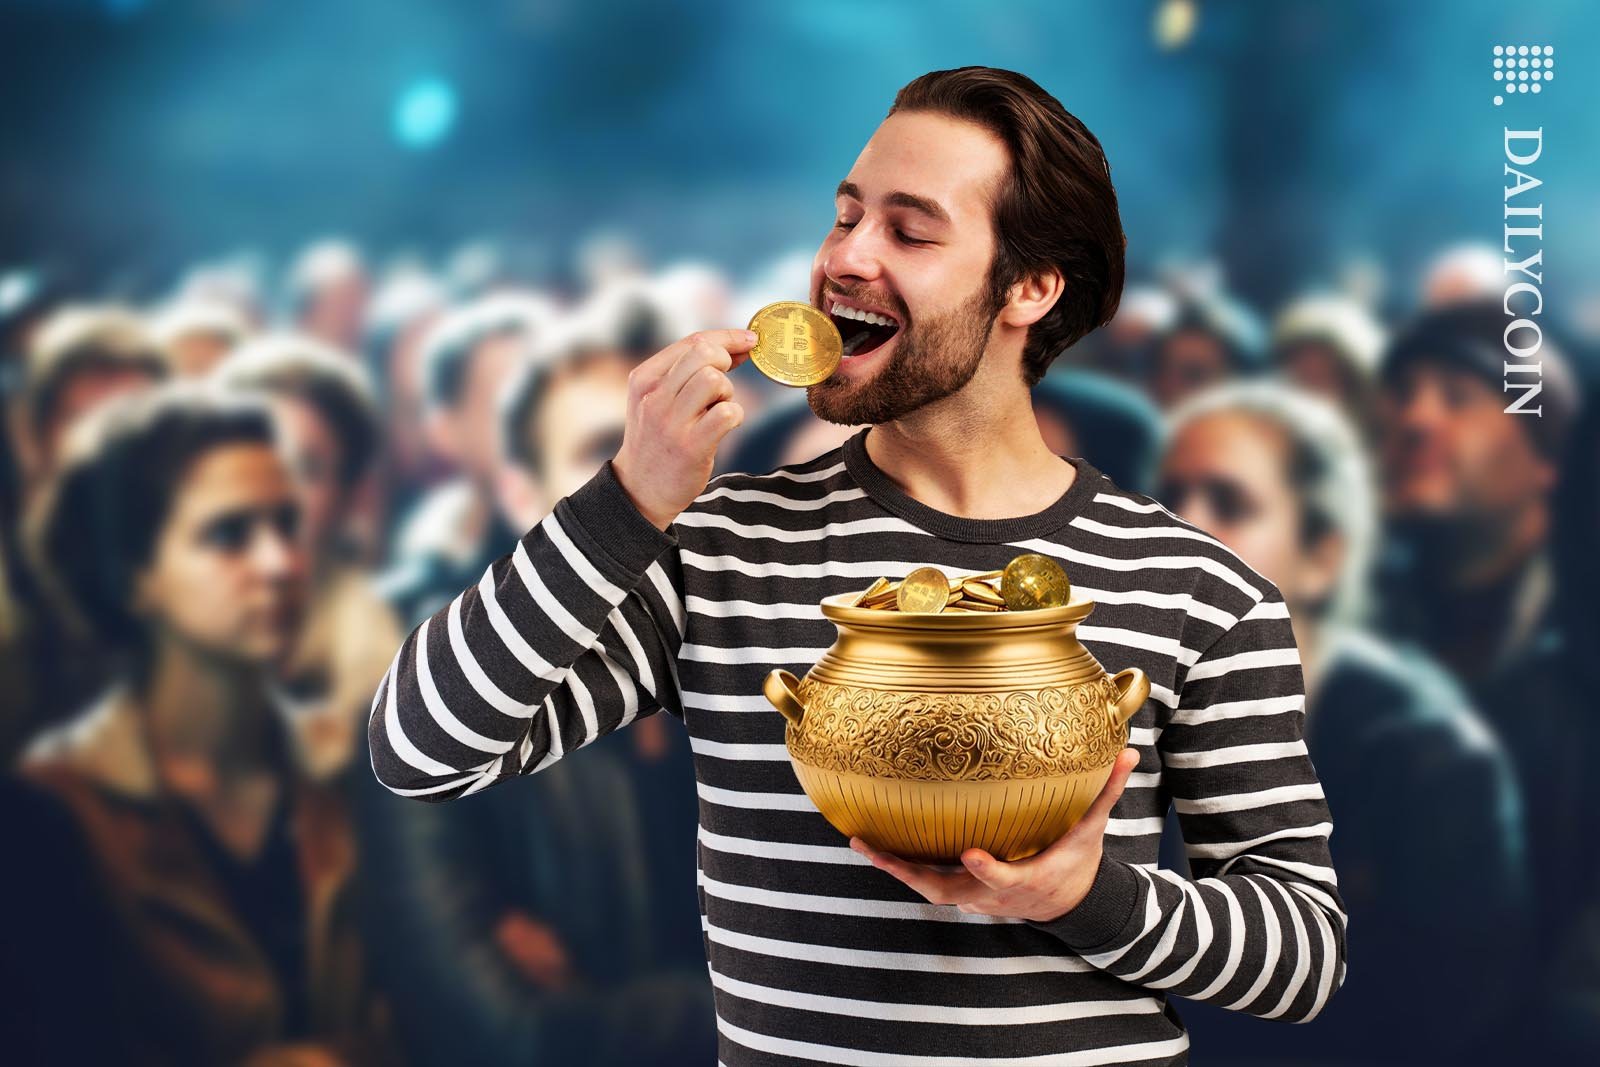 Man eating on a bowl of Bitcoins with great pleasure as a crowd watching him.